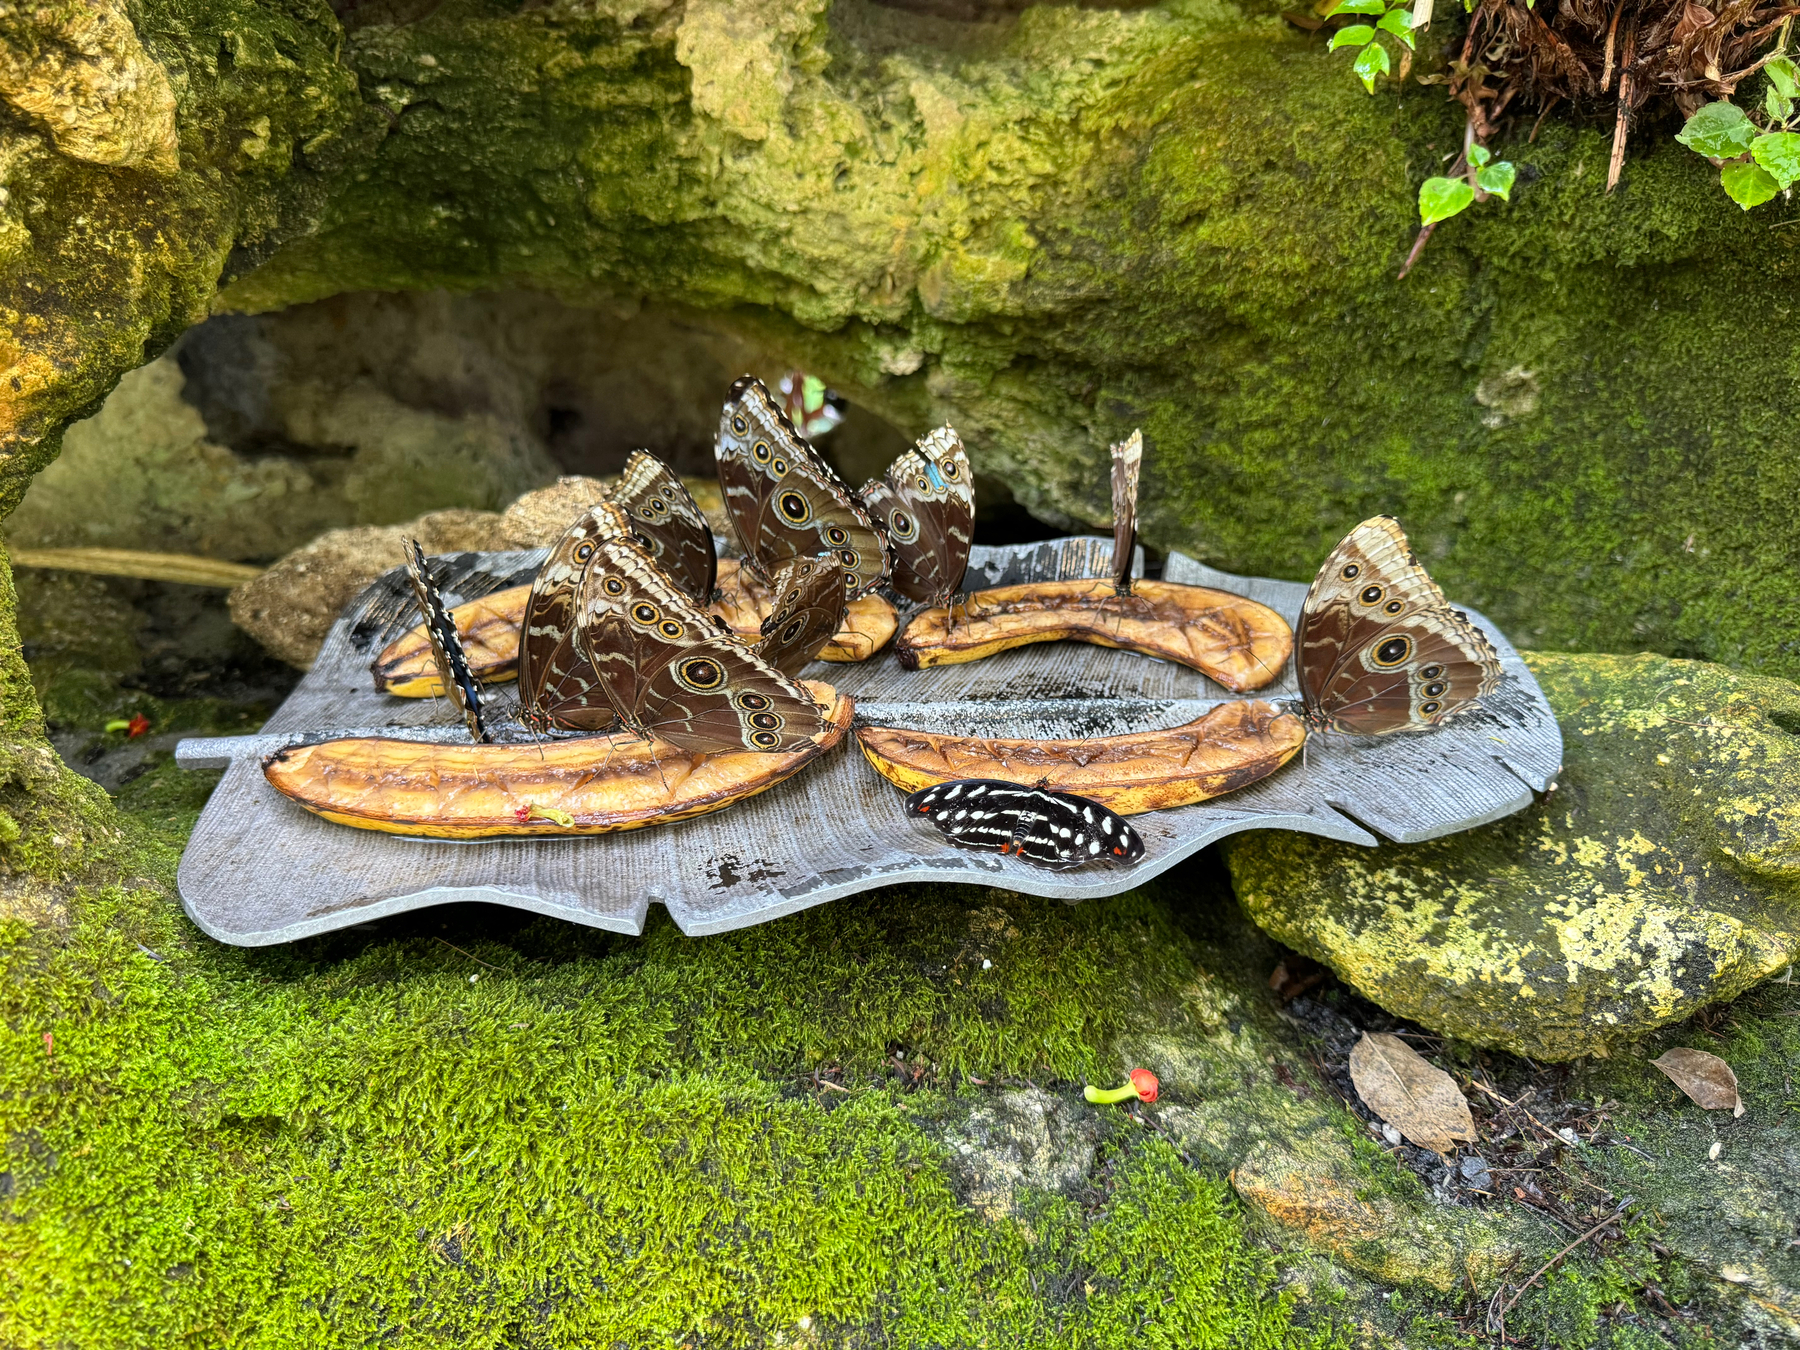 A group of butterflies feeding on sliced bananas placed on a flat surface, surrounded by rocks covered with green moss.